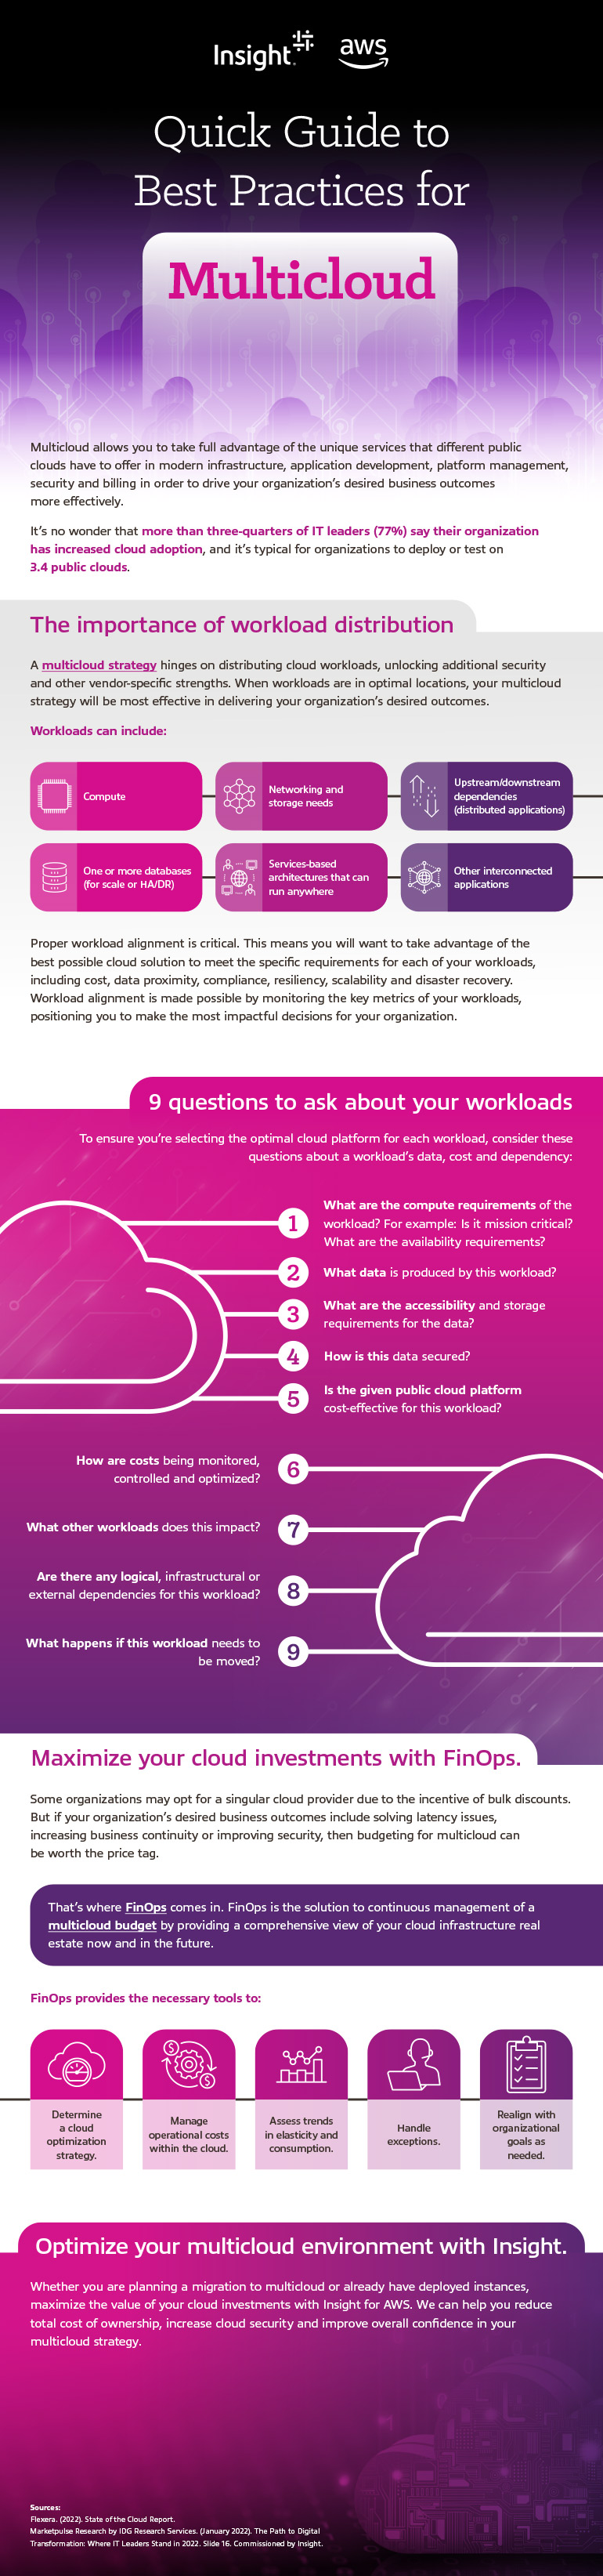 Infographic Quick Guide to Best Practices for Multicloud. Translated below.